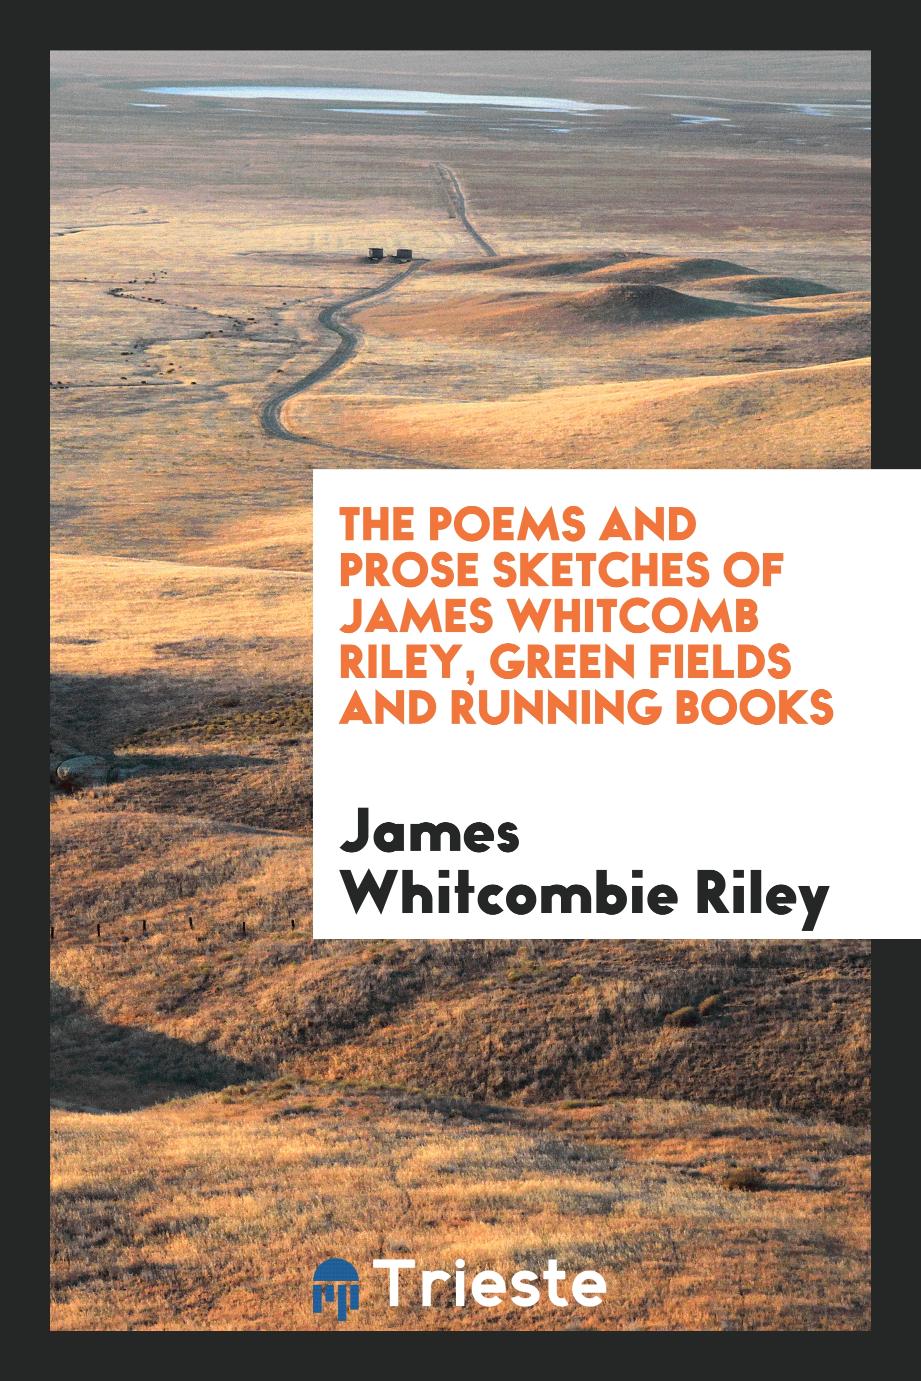 The poems and prose sketches of James Whitcomb Riley, Green fields and running books